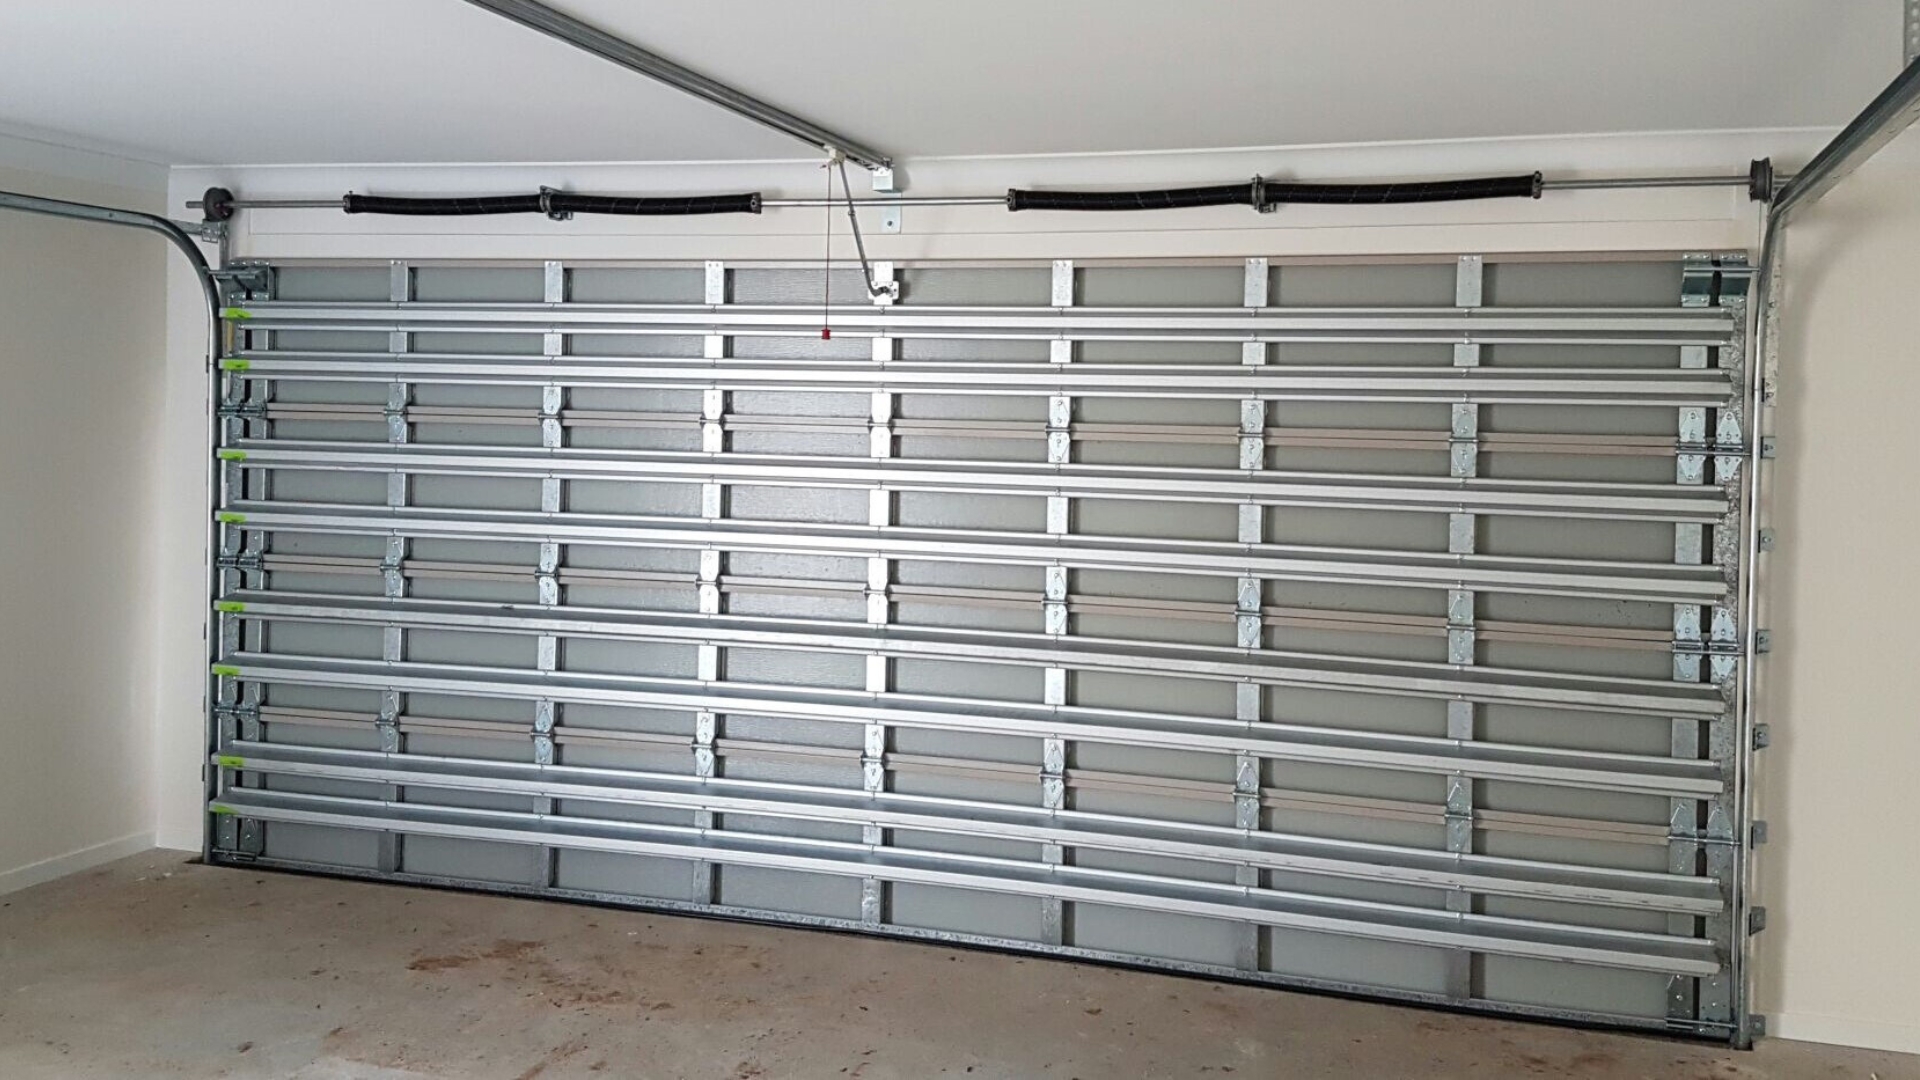 An impact-rated garage door installed in a home